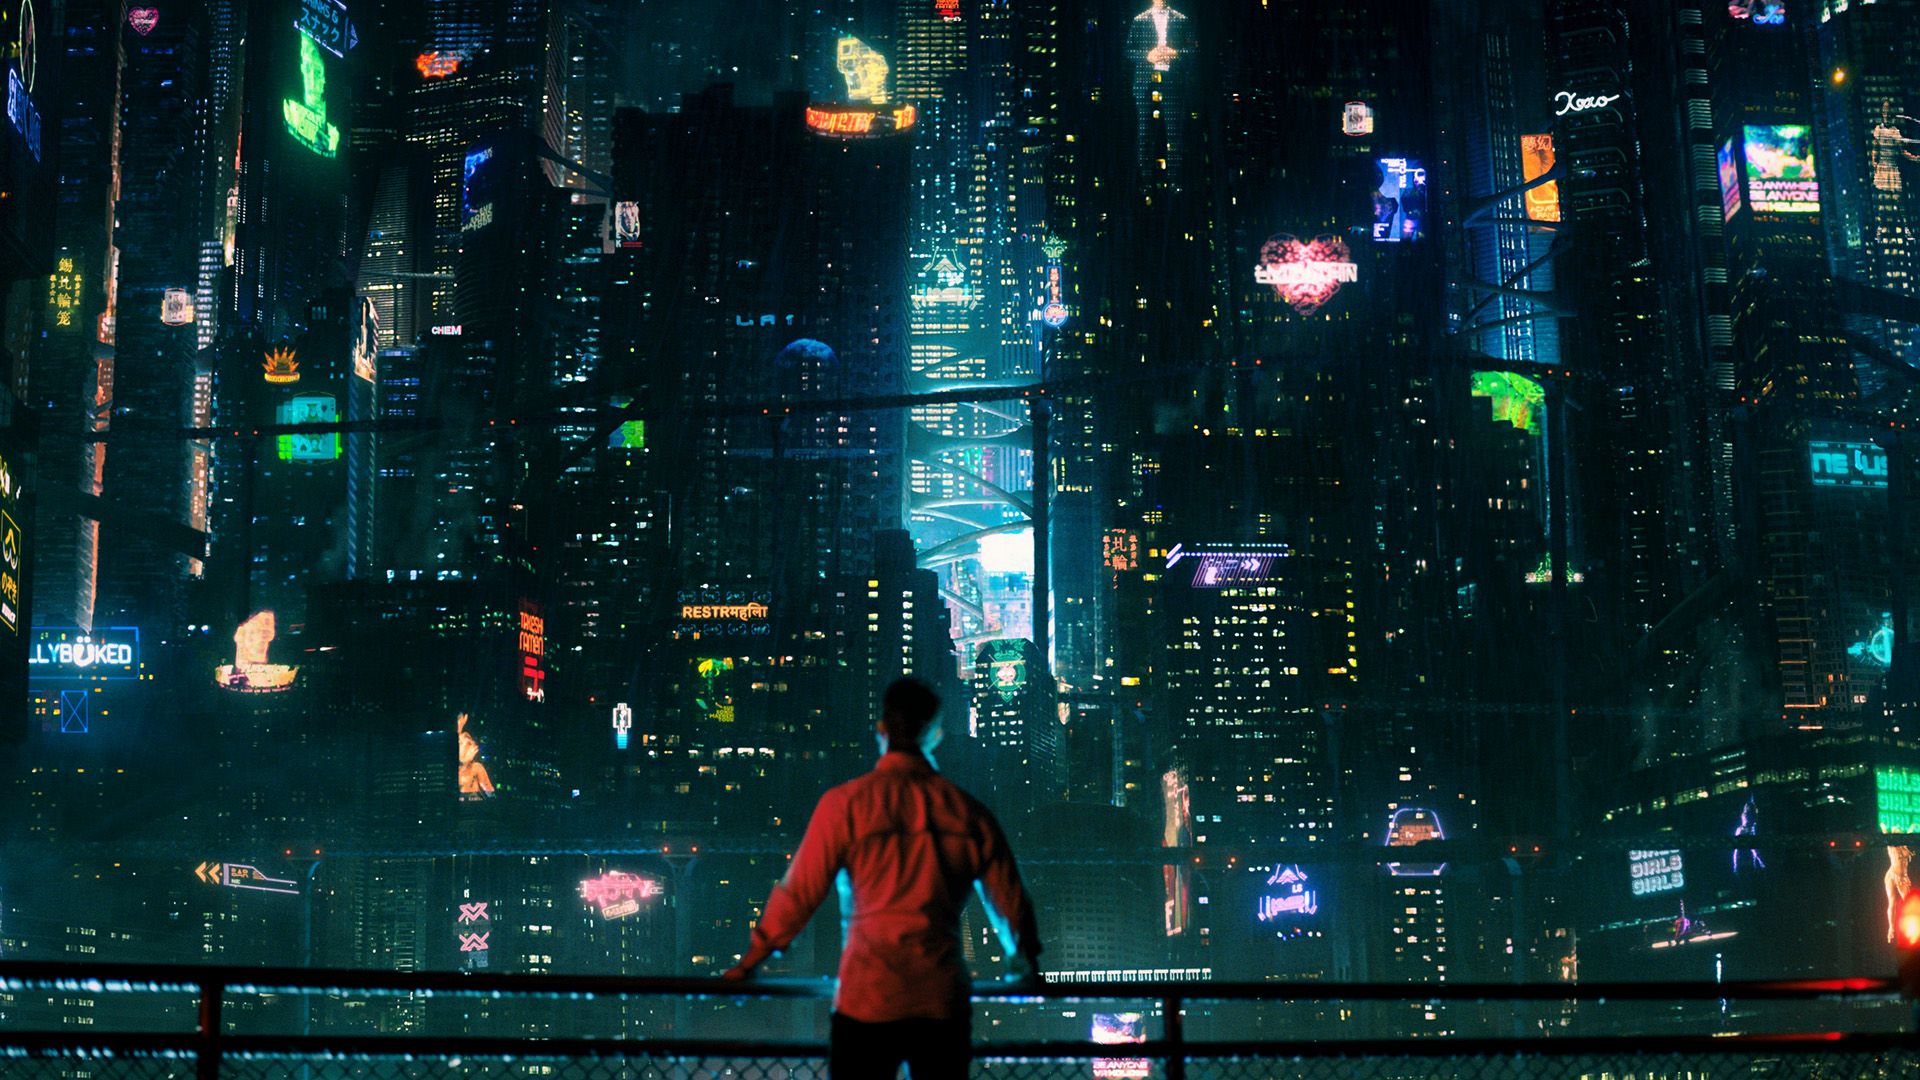 Altered Carbon background